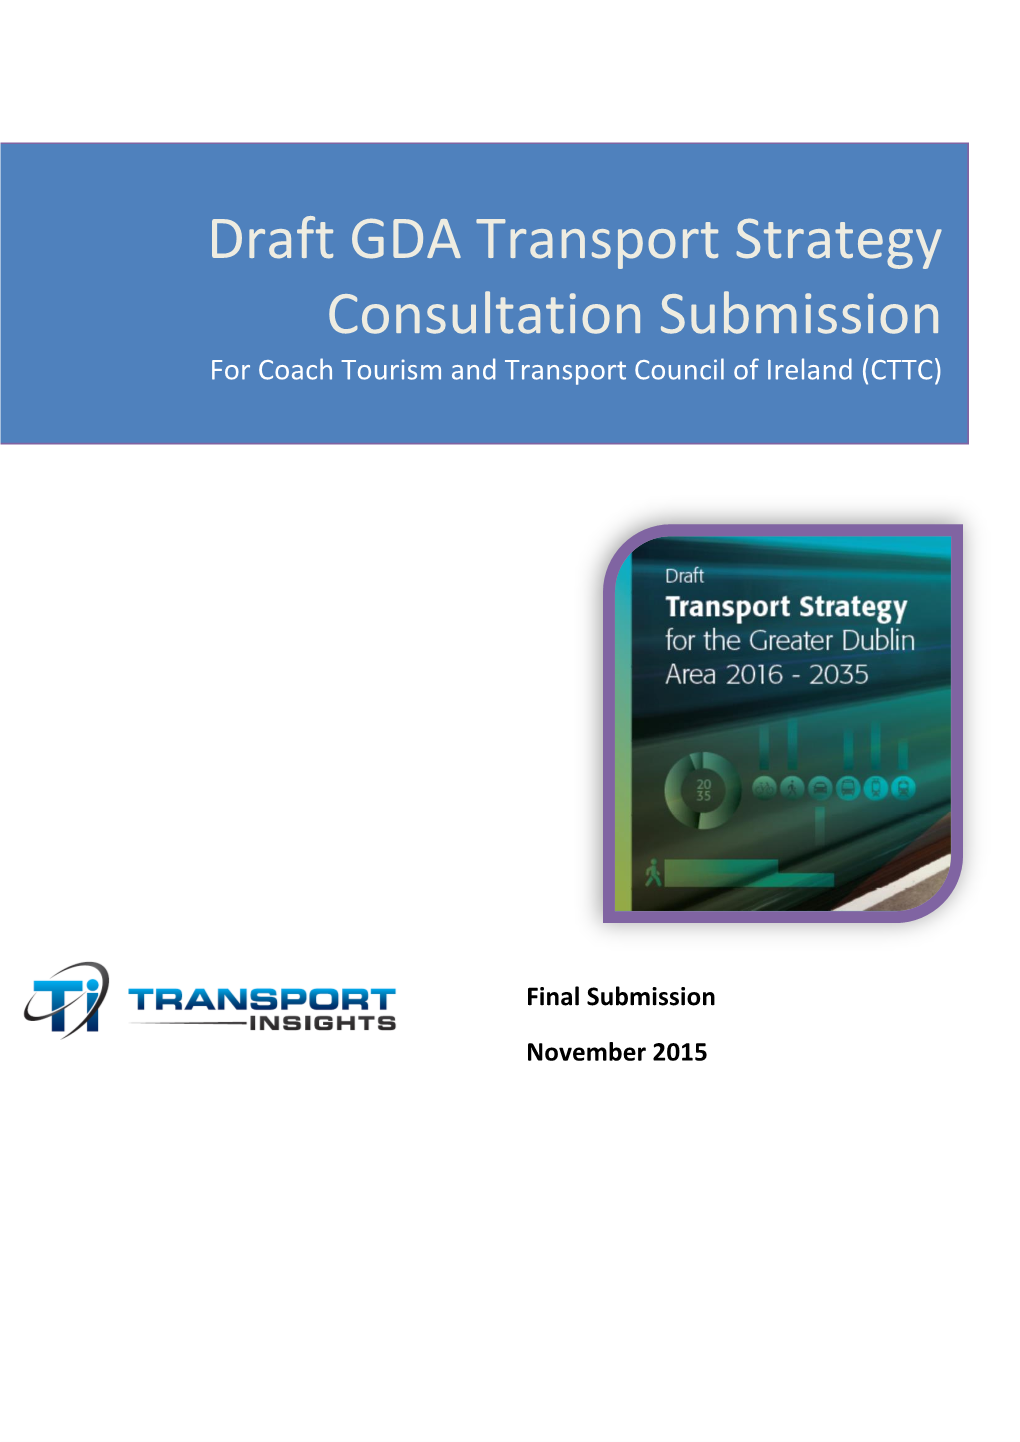 Draft GDA Transport Strategy Consultation Submission